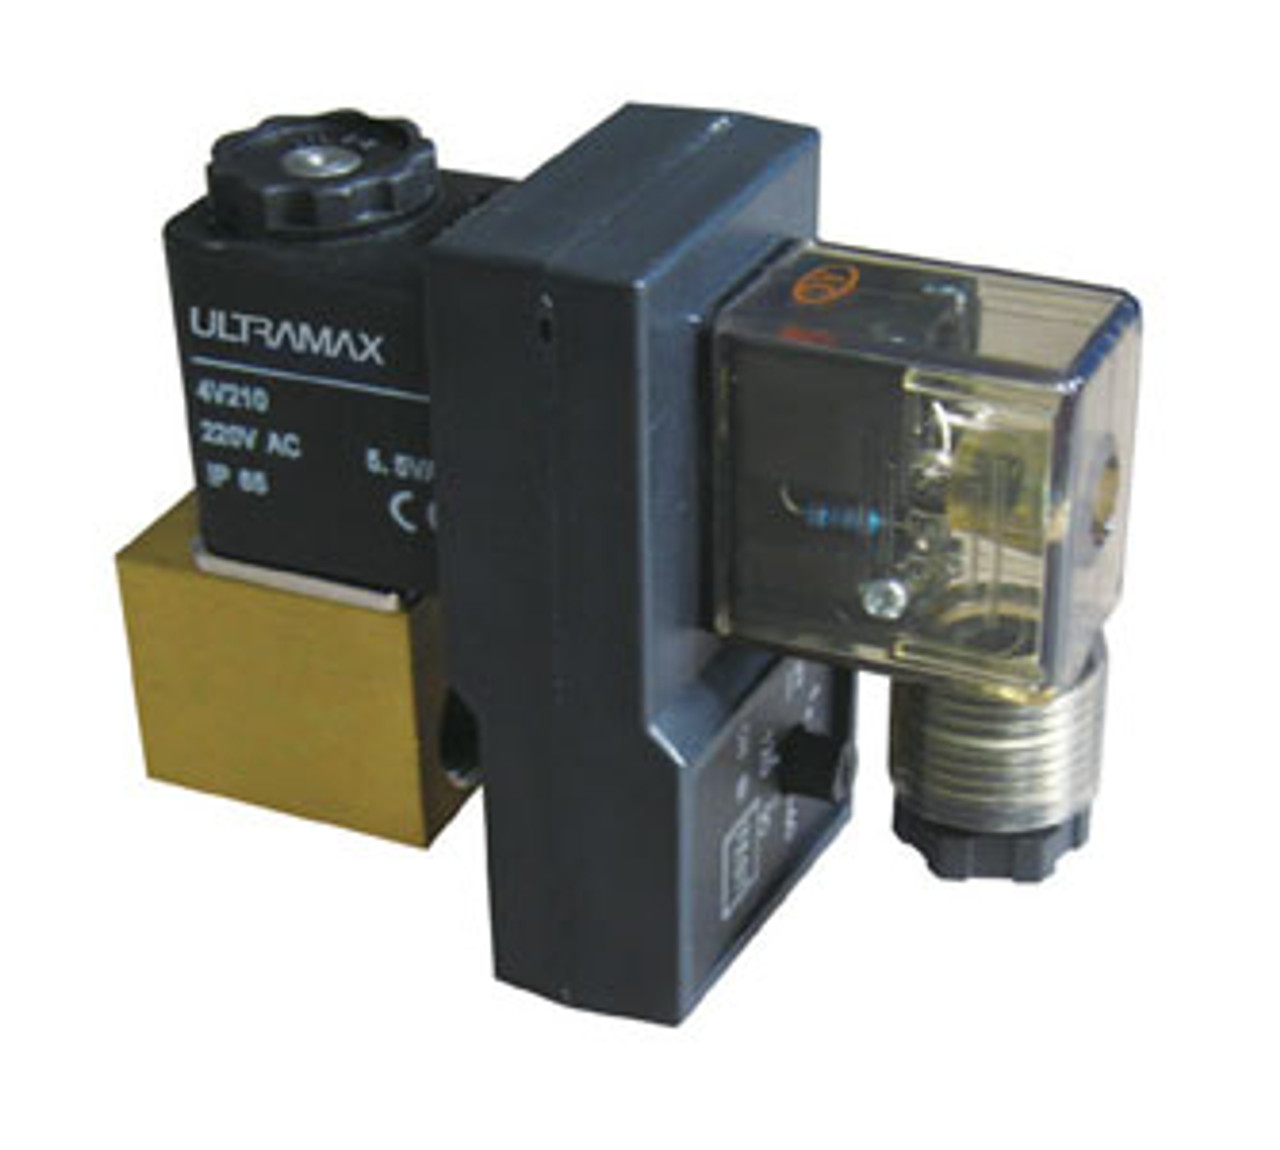 Electronic Condensate BSP Drain Valve (Compact) 1/4" x 2 x 230V AC